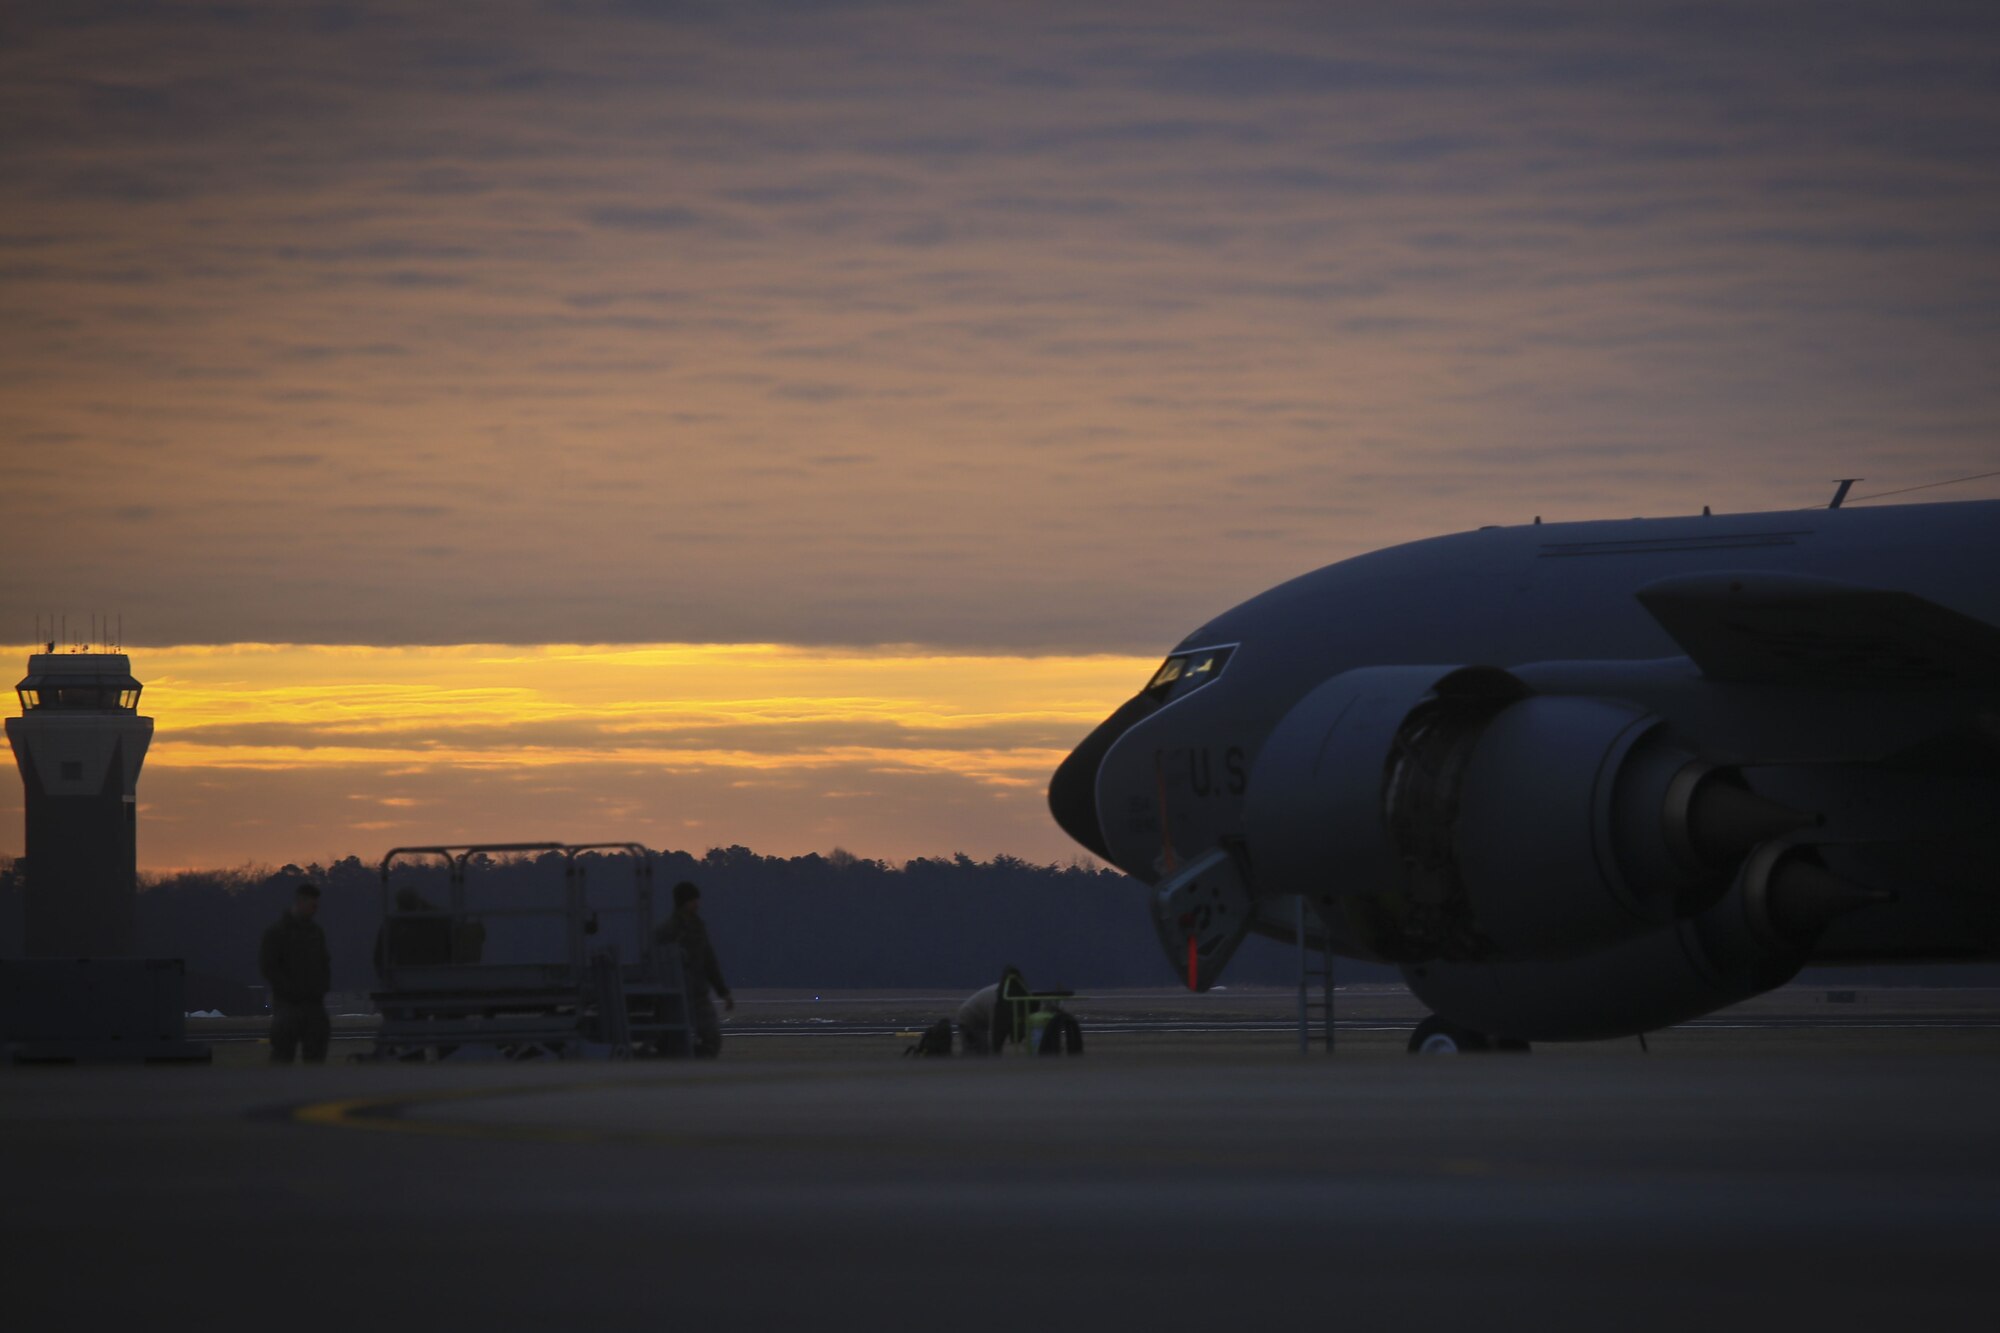 A New Jersey Air National Guard KC-135R from the 108th Wing is worked on by maintenance airmen at sunrise on Joint Base McGuire-Dix-Lakehurst, N.J., Jan. 11, 2018. (U.S. Air National Guard photo by Master Sgt. Matt Hecht)